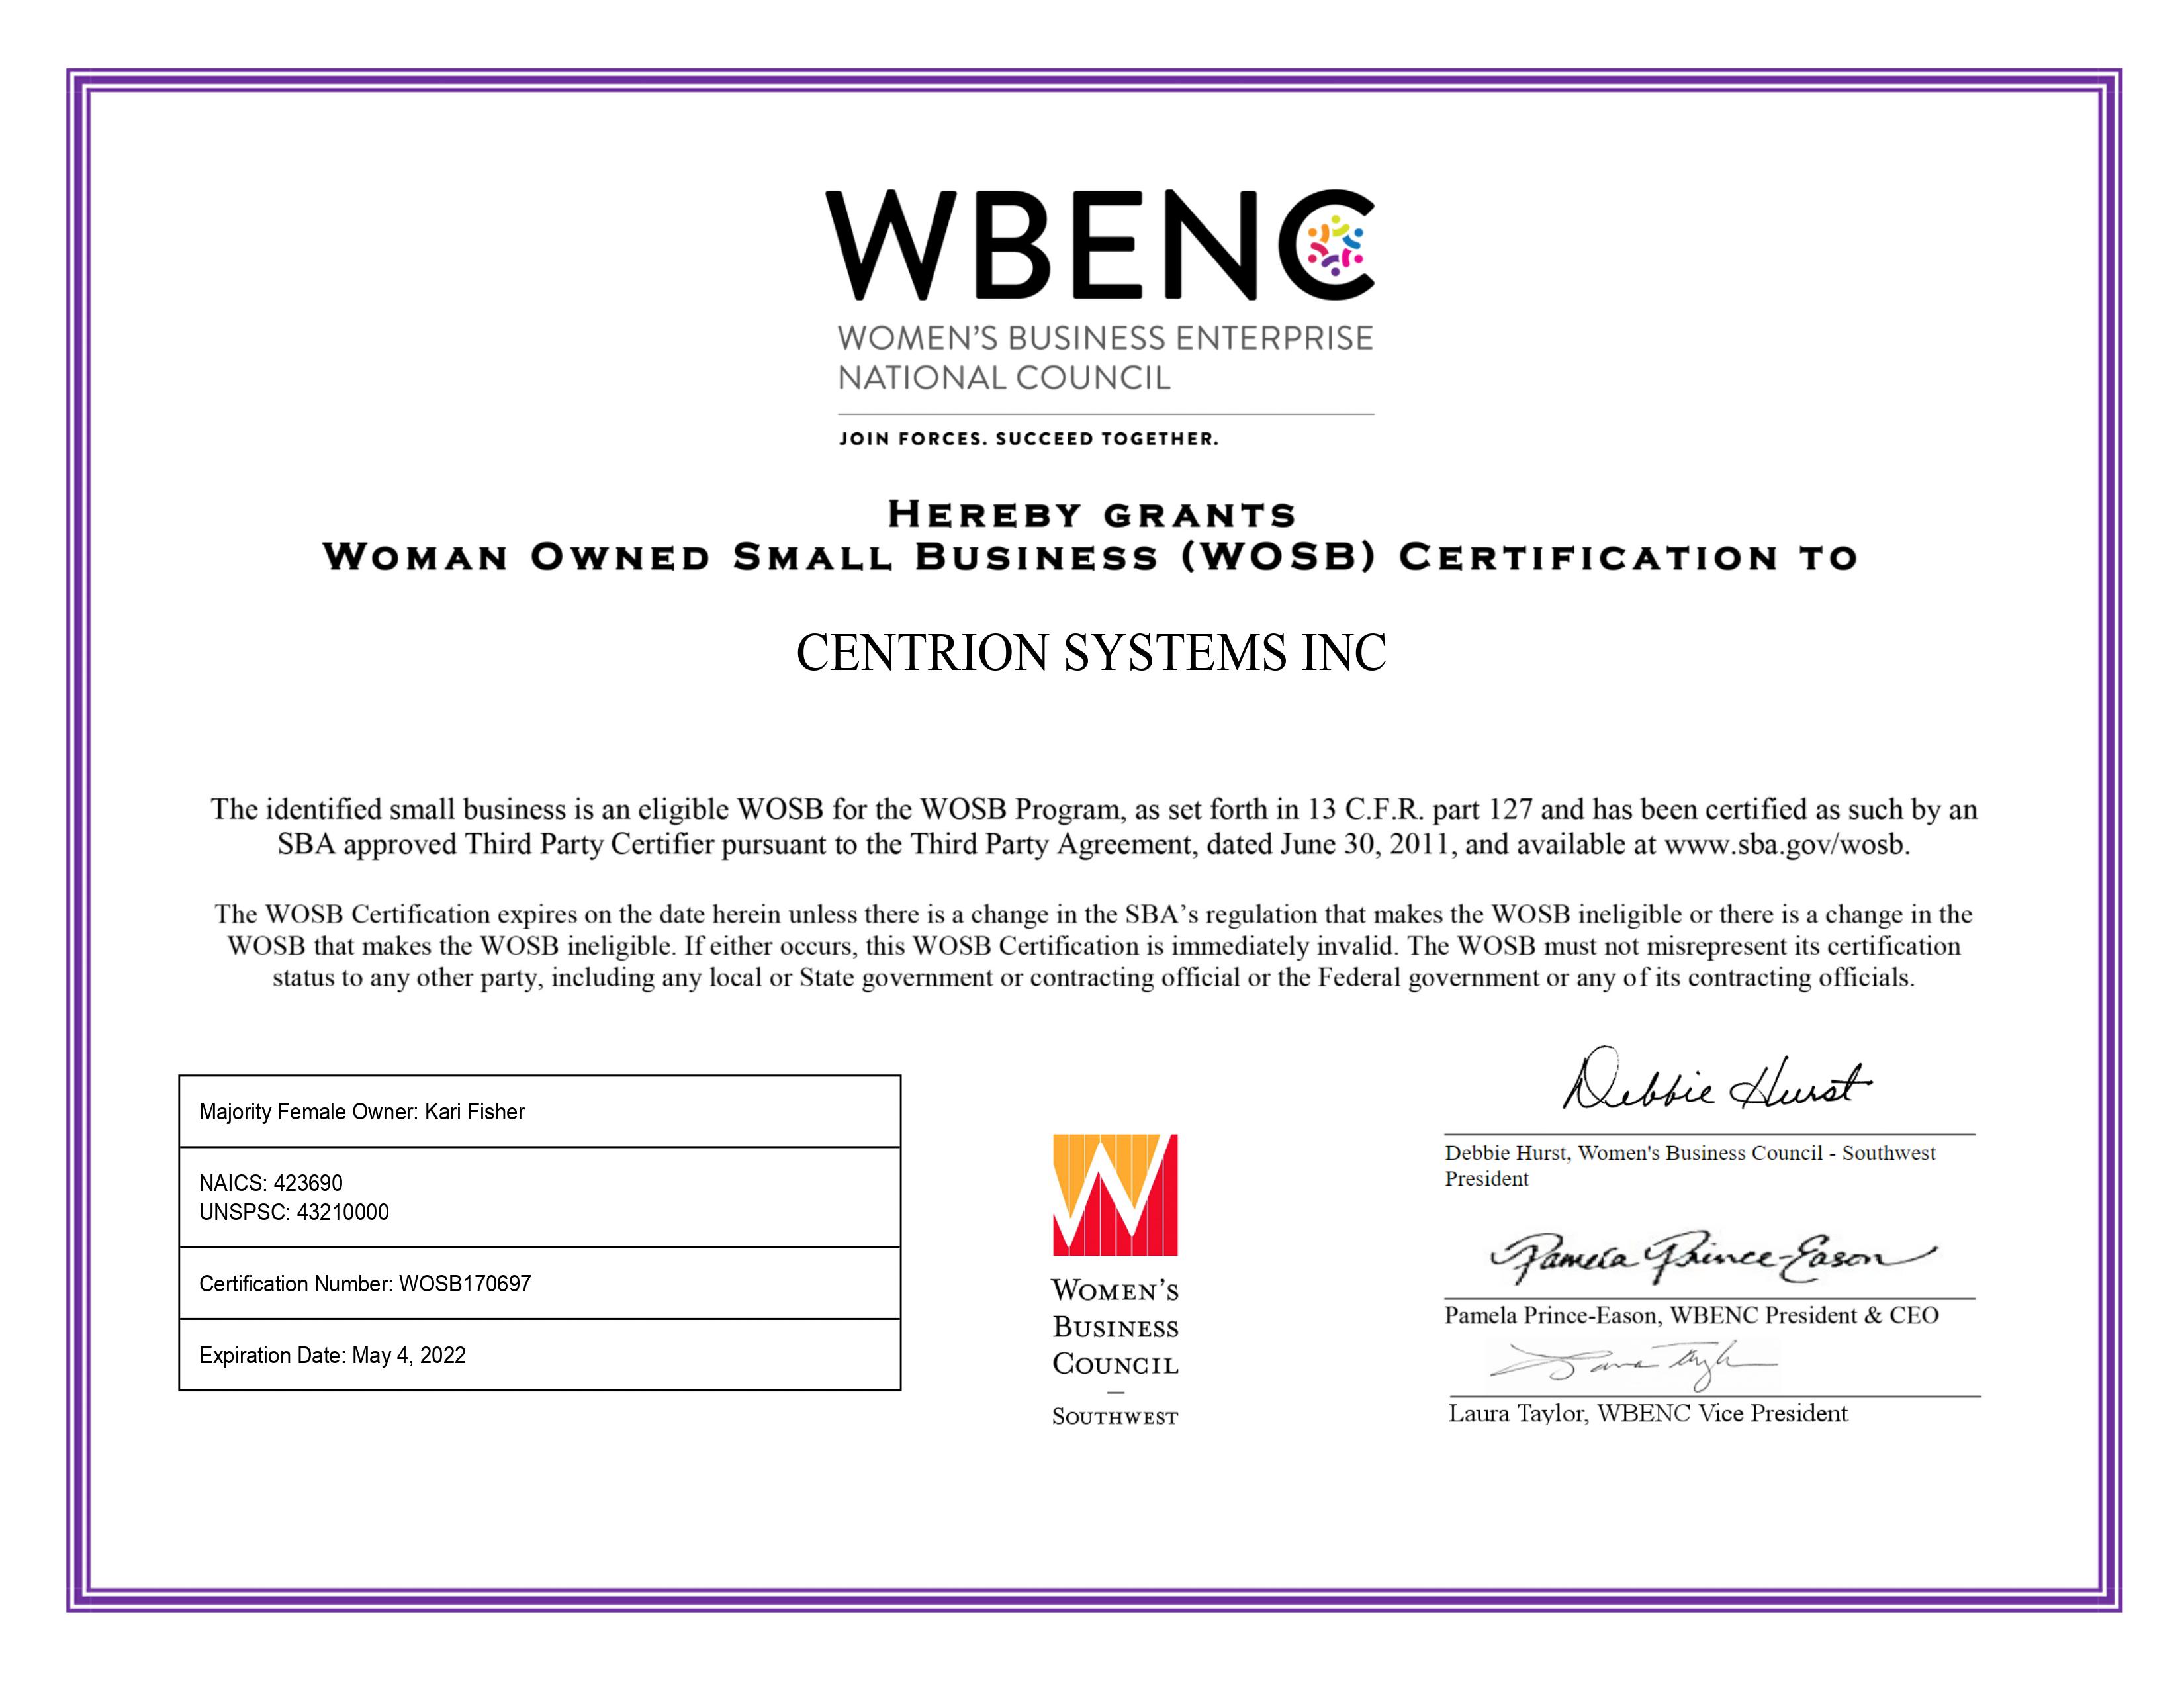 Woman Owned Small Business (WOSB) Certification